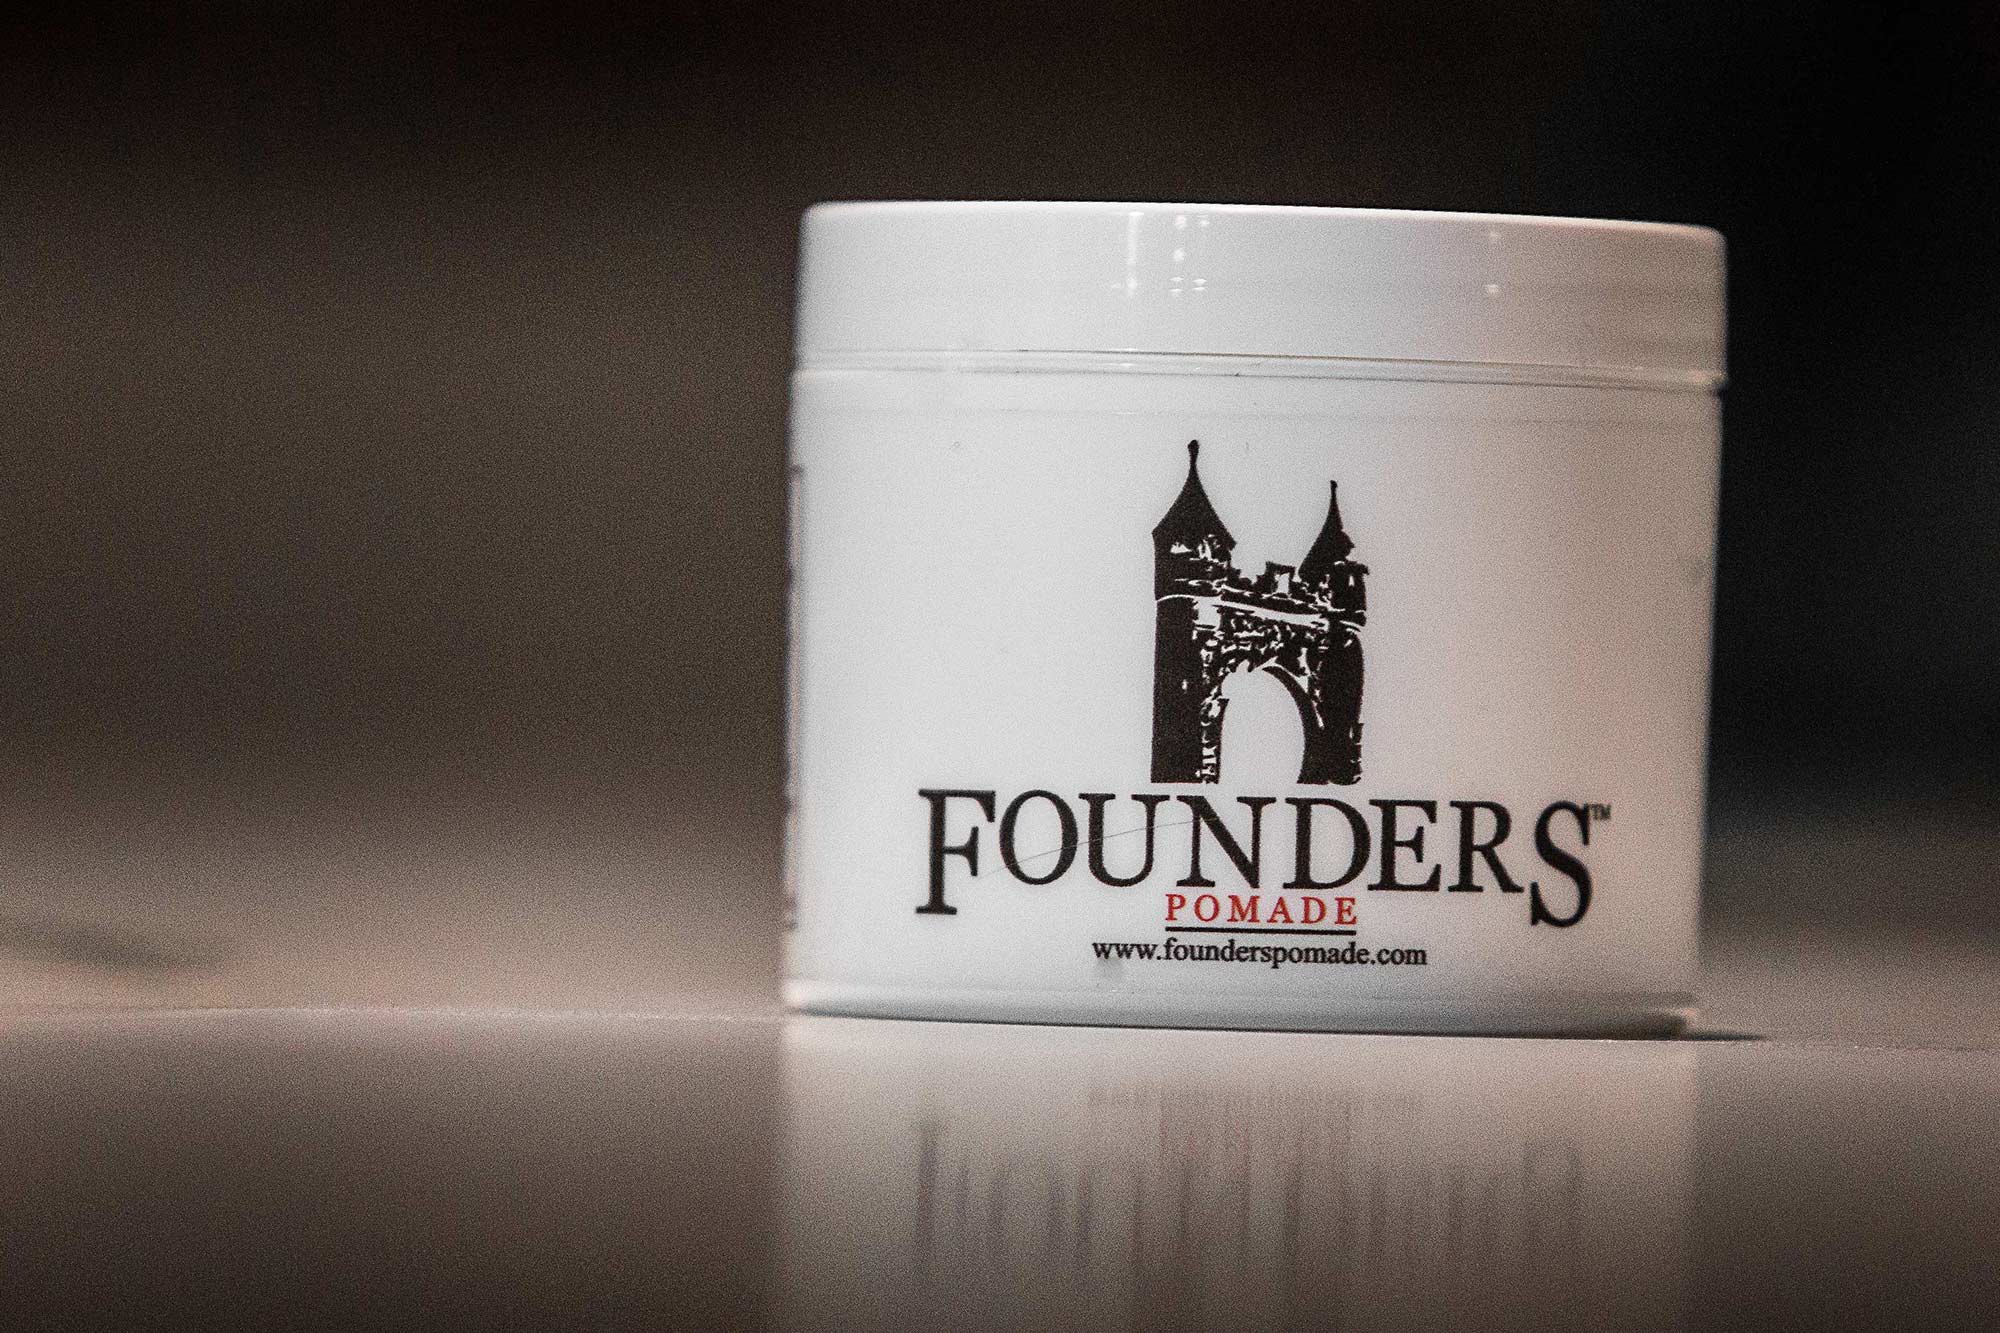 Founders Pomade, West Hartford, CT